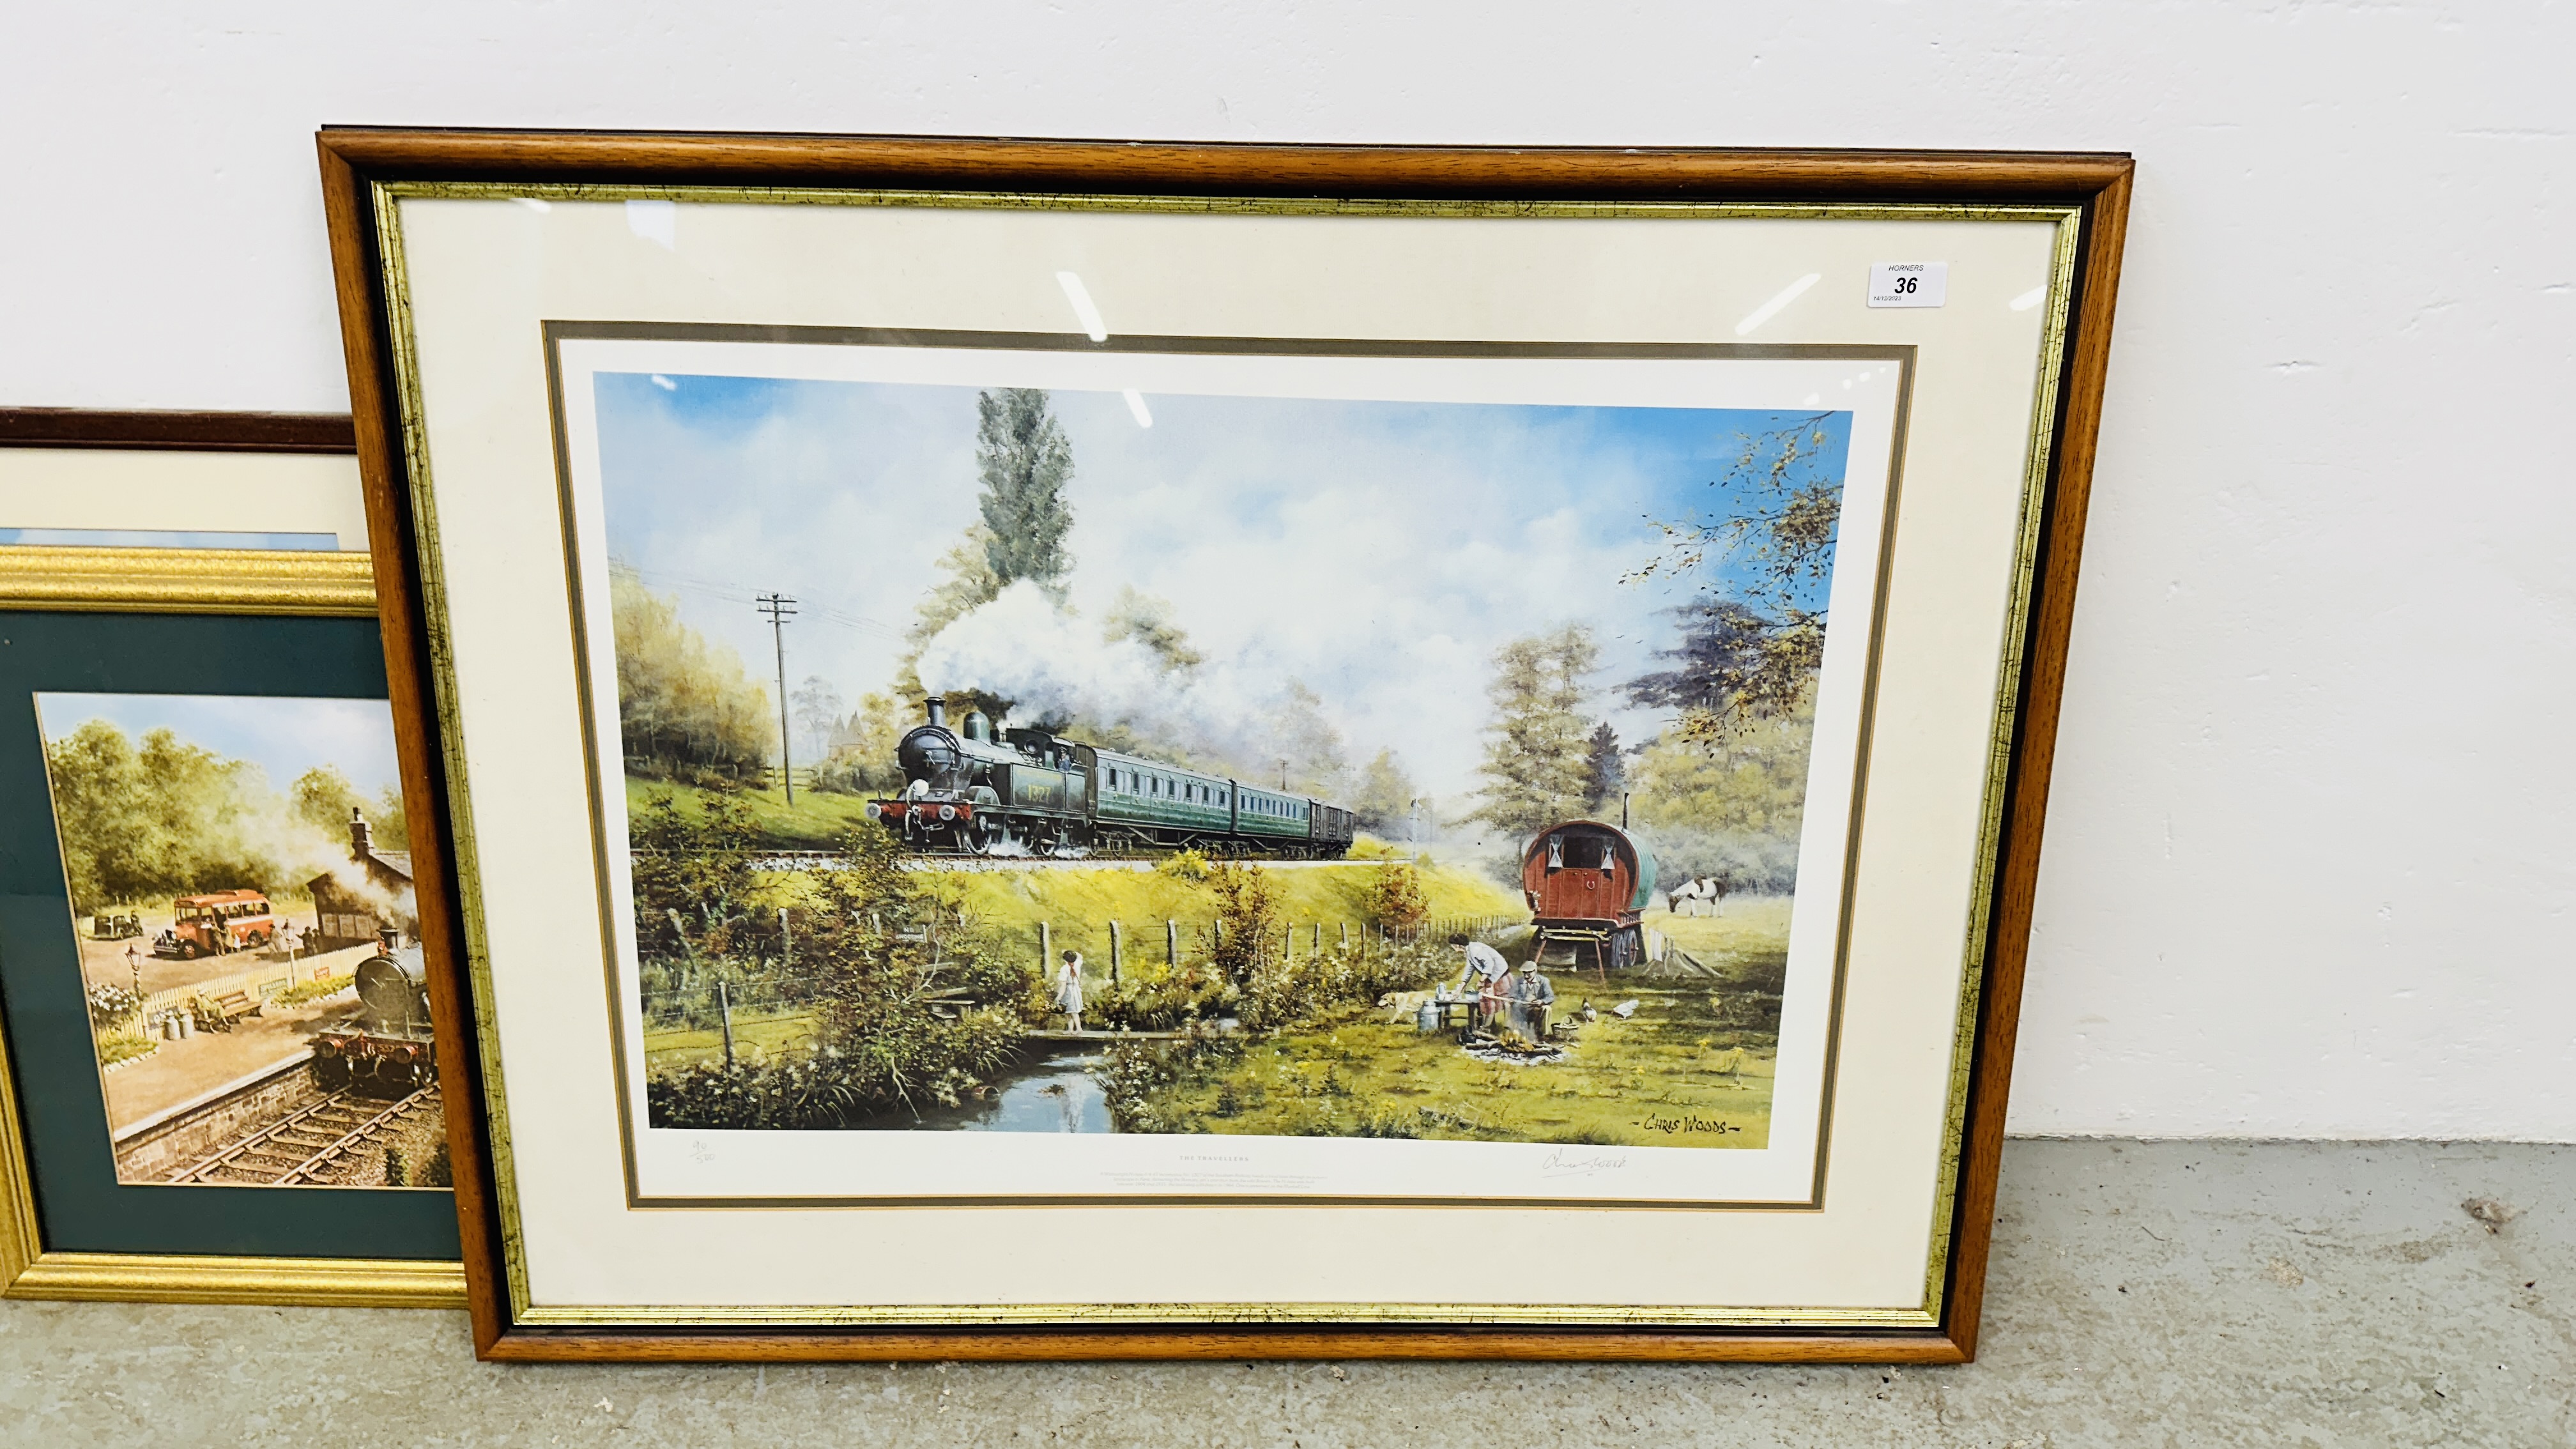 LIMITED EDITION CHRISWOODS STEAM TRAIN PRINT 90/500 "THE TRAVELLERS" 42. - Image 2 of 5